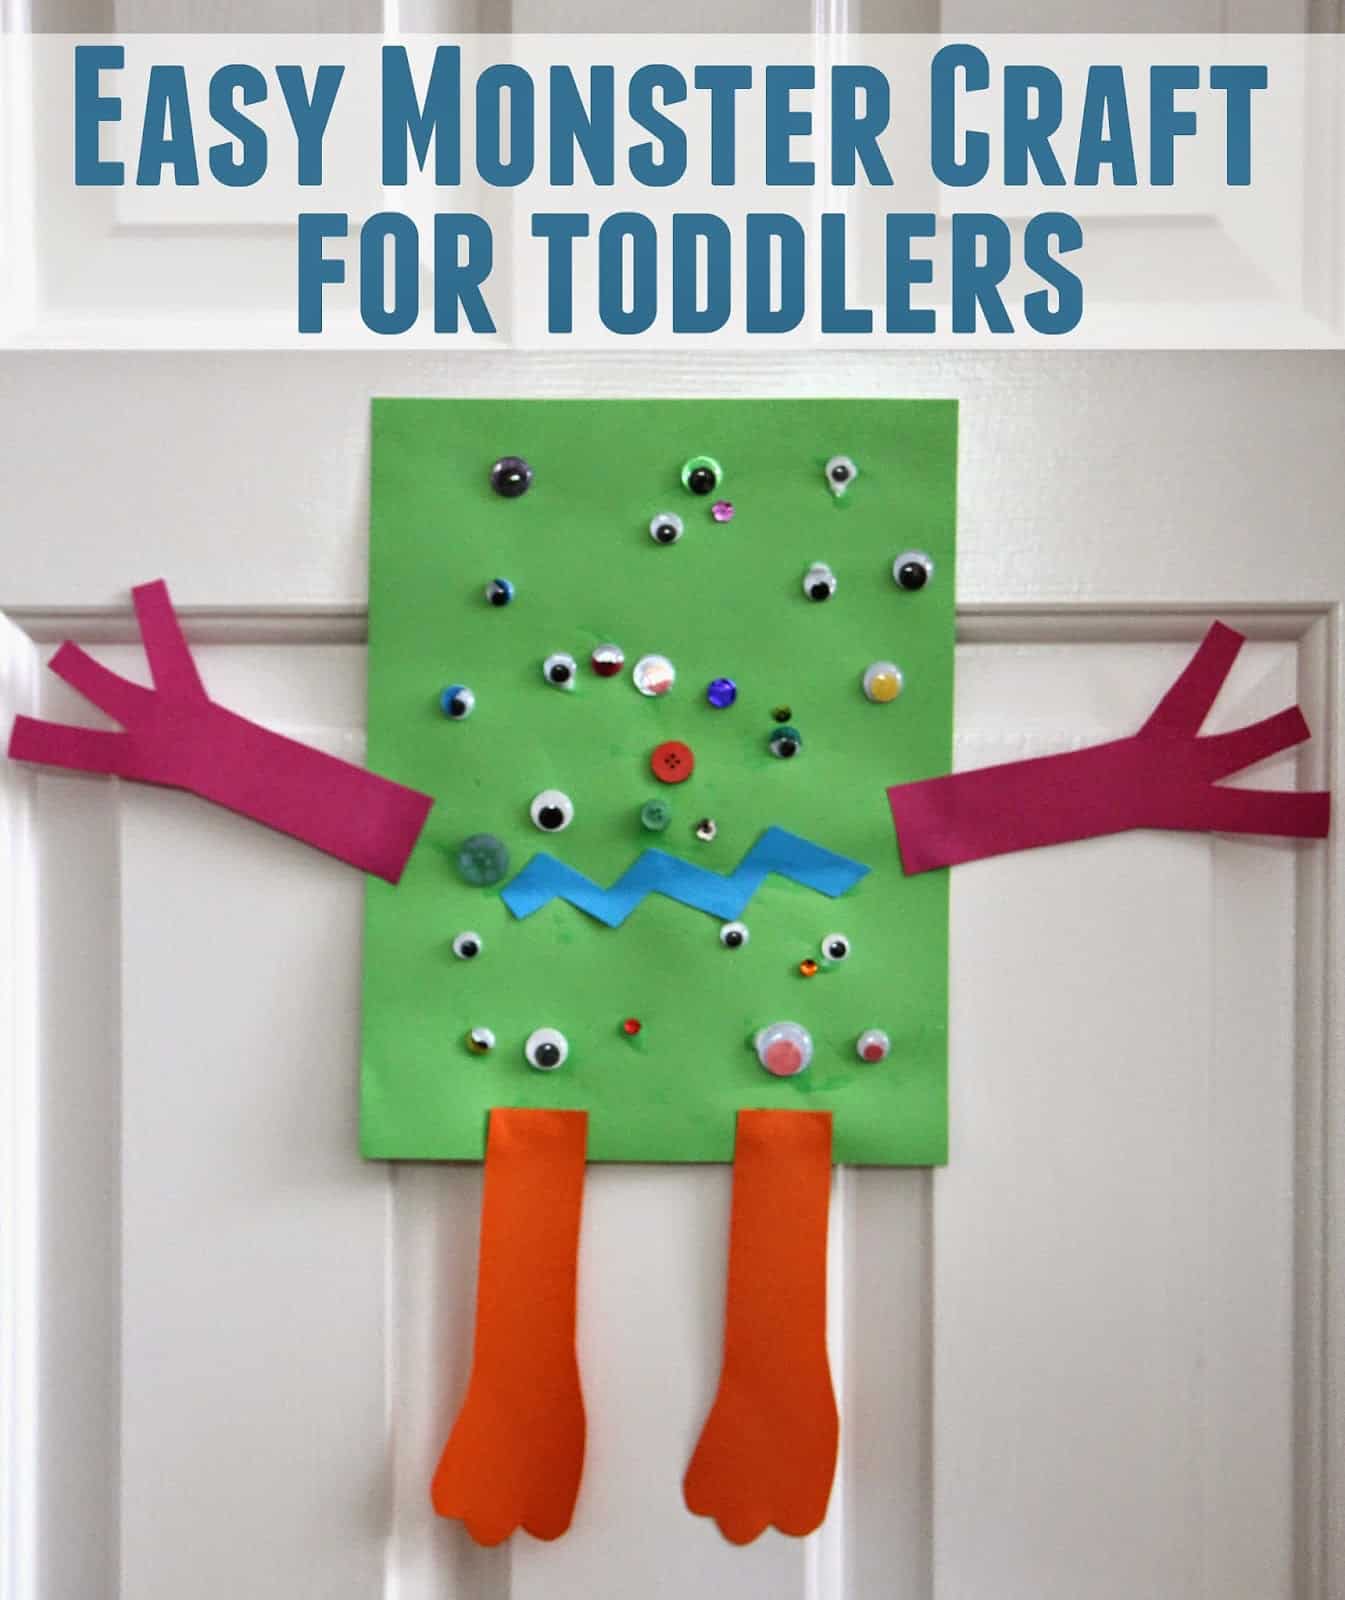 Easy Monster Craft for Toddlers - Toddler Approved